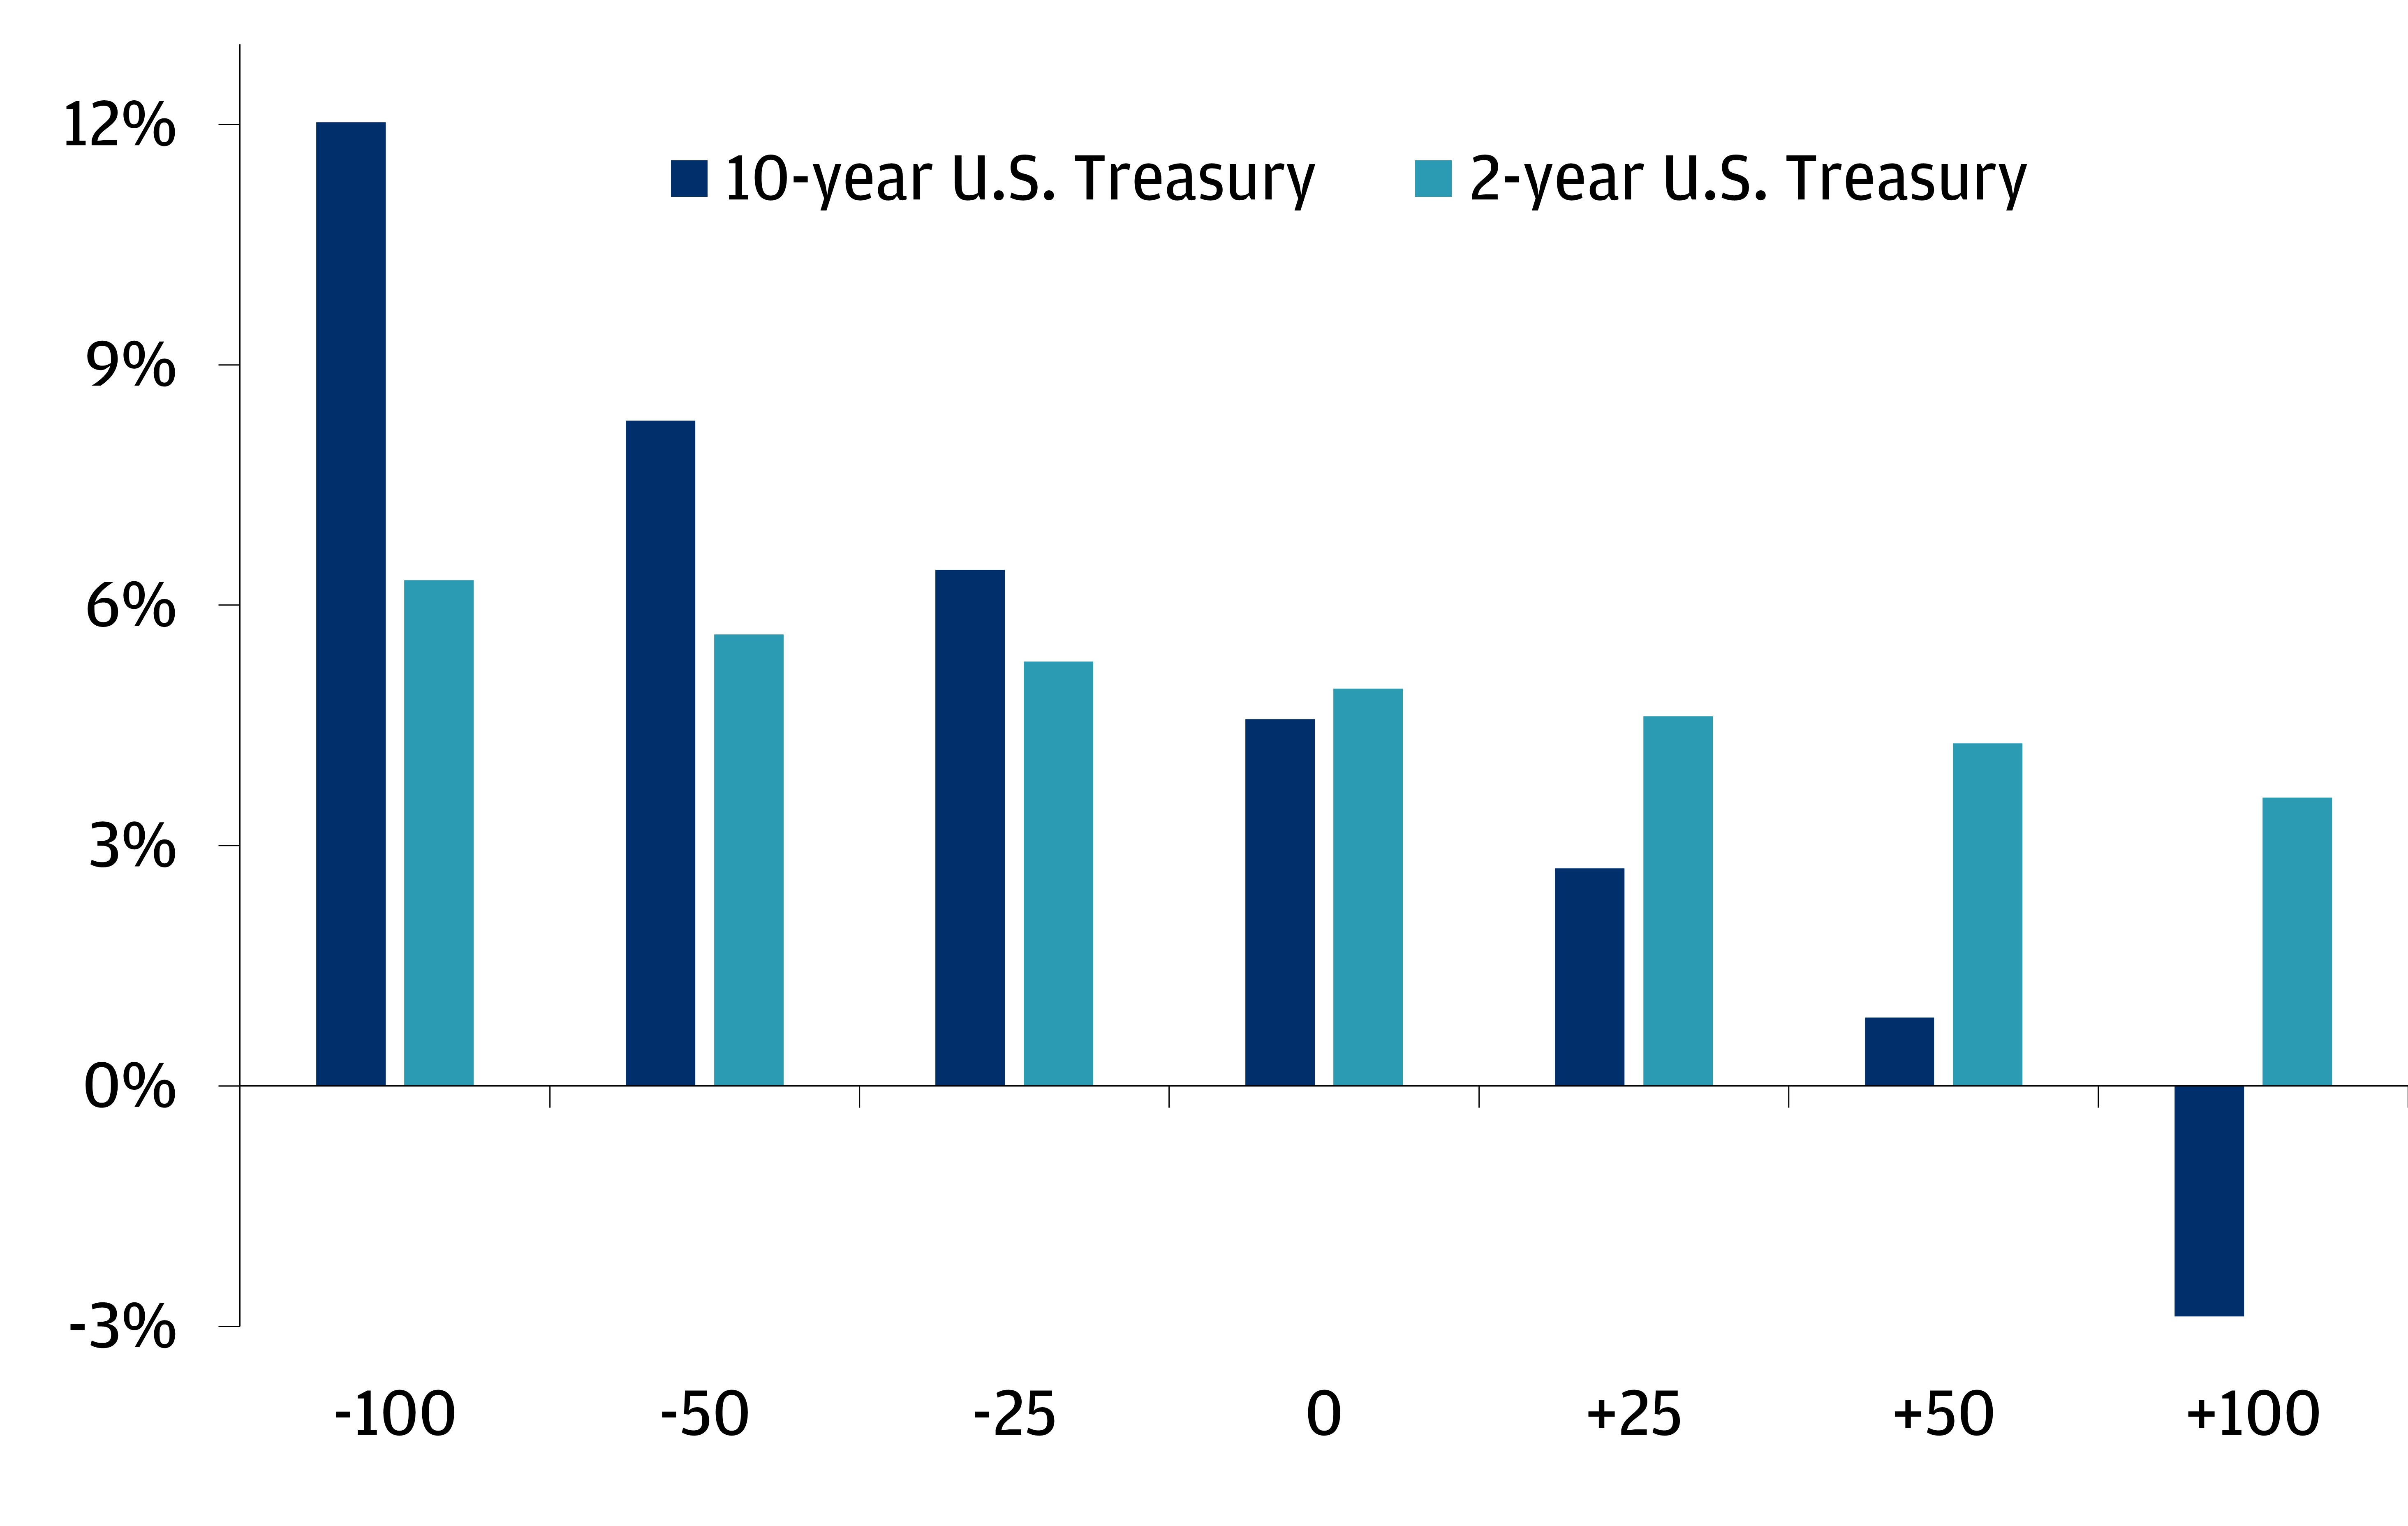 This chart shows the illustrative 12-month forward returns based on a change in yield.